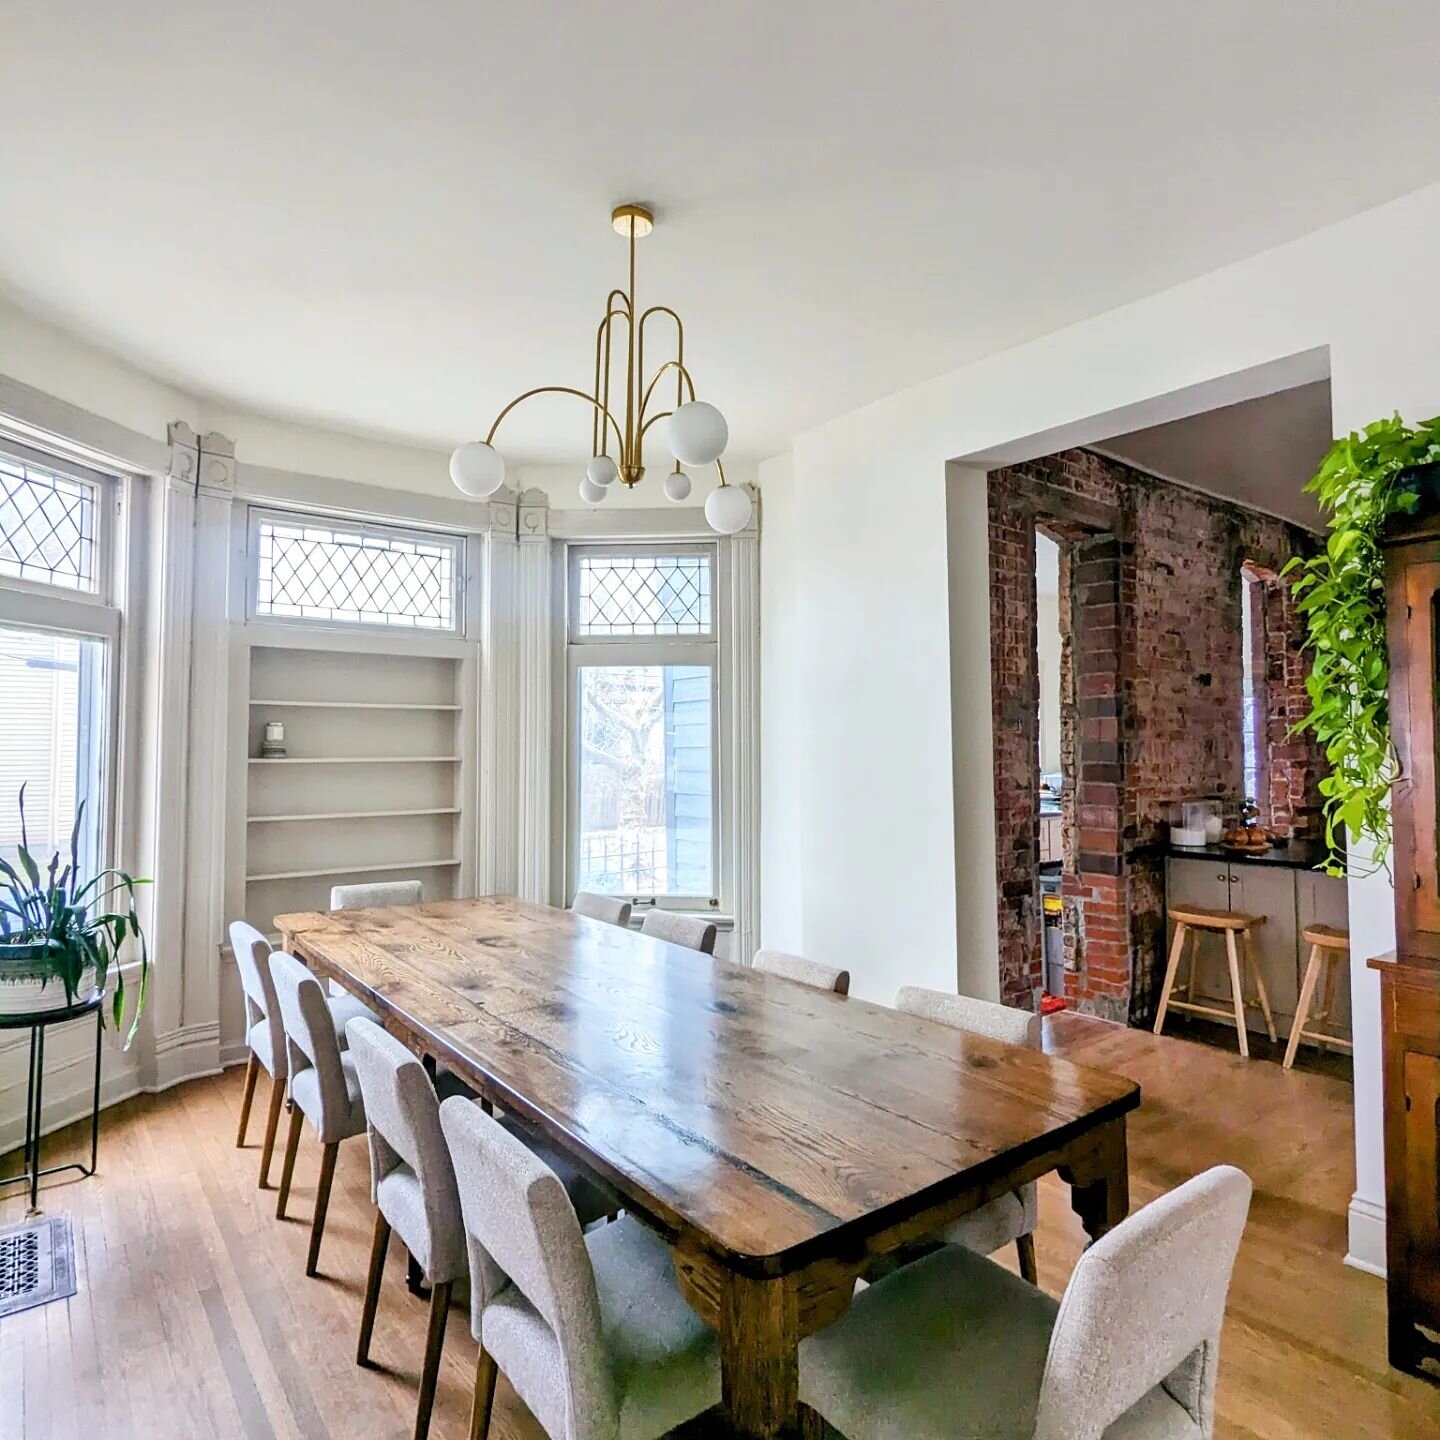 We spent some time this week photographing this beautiful 1880s home in Pendleton Heights KCMO that we completed last year - here's a glimpse of the dining room (swipe for the before) The entire house was renovated to accommodate a family of 8, a few